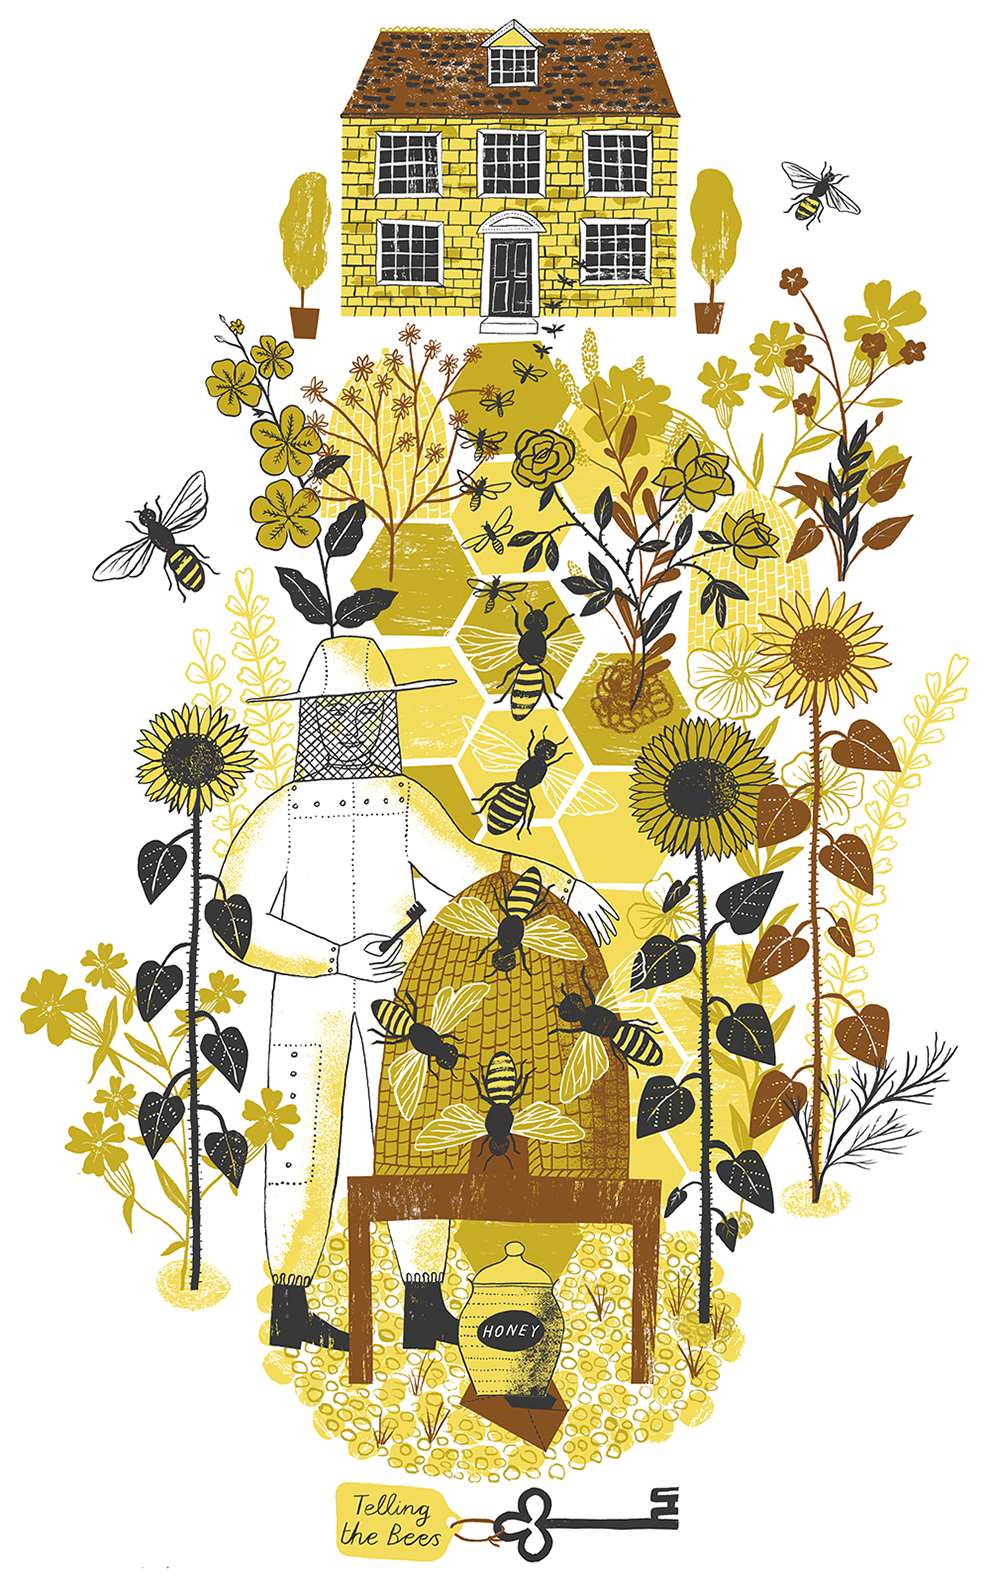 Alice Pattullo, 'Telling The Bees' Screenprint of a beekeeper in their garden amongst botanicals and flowers. Decorative yellow illustration. 